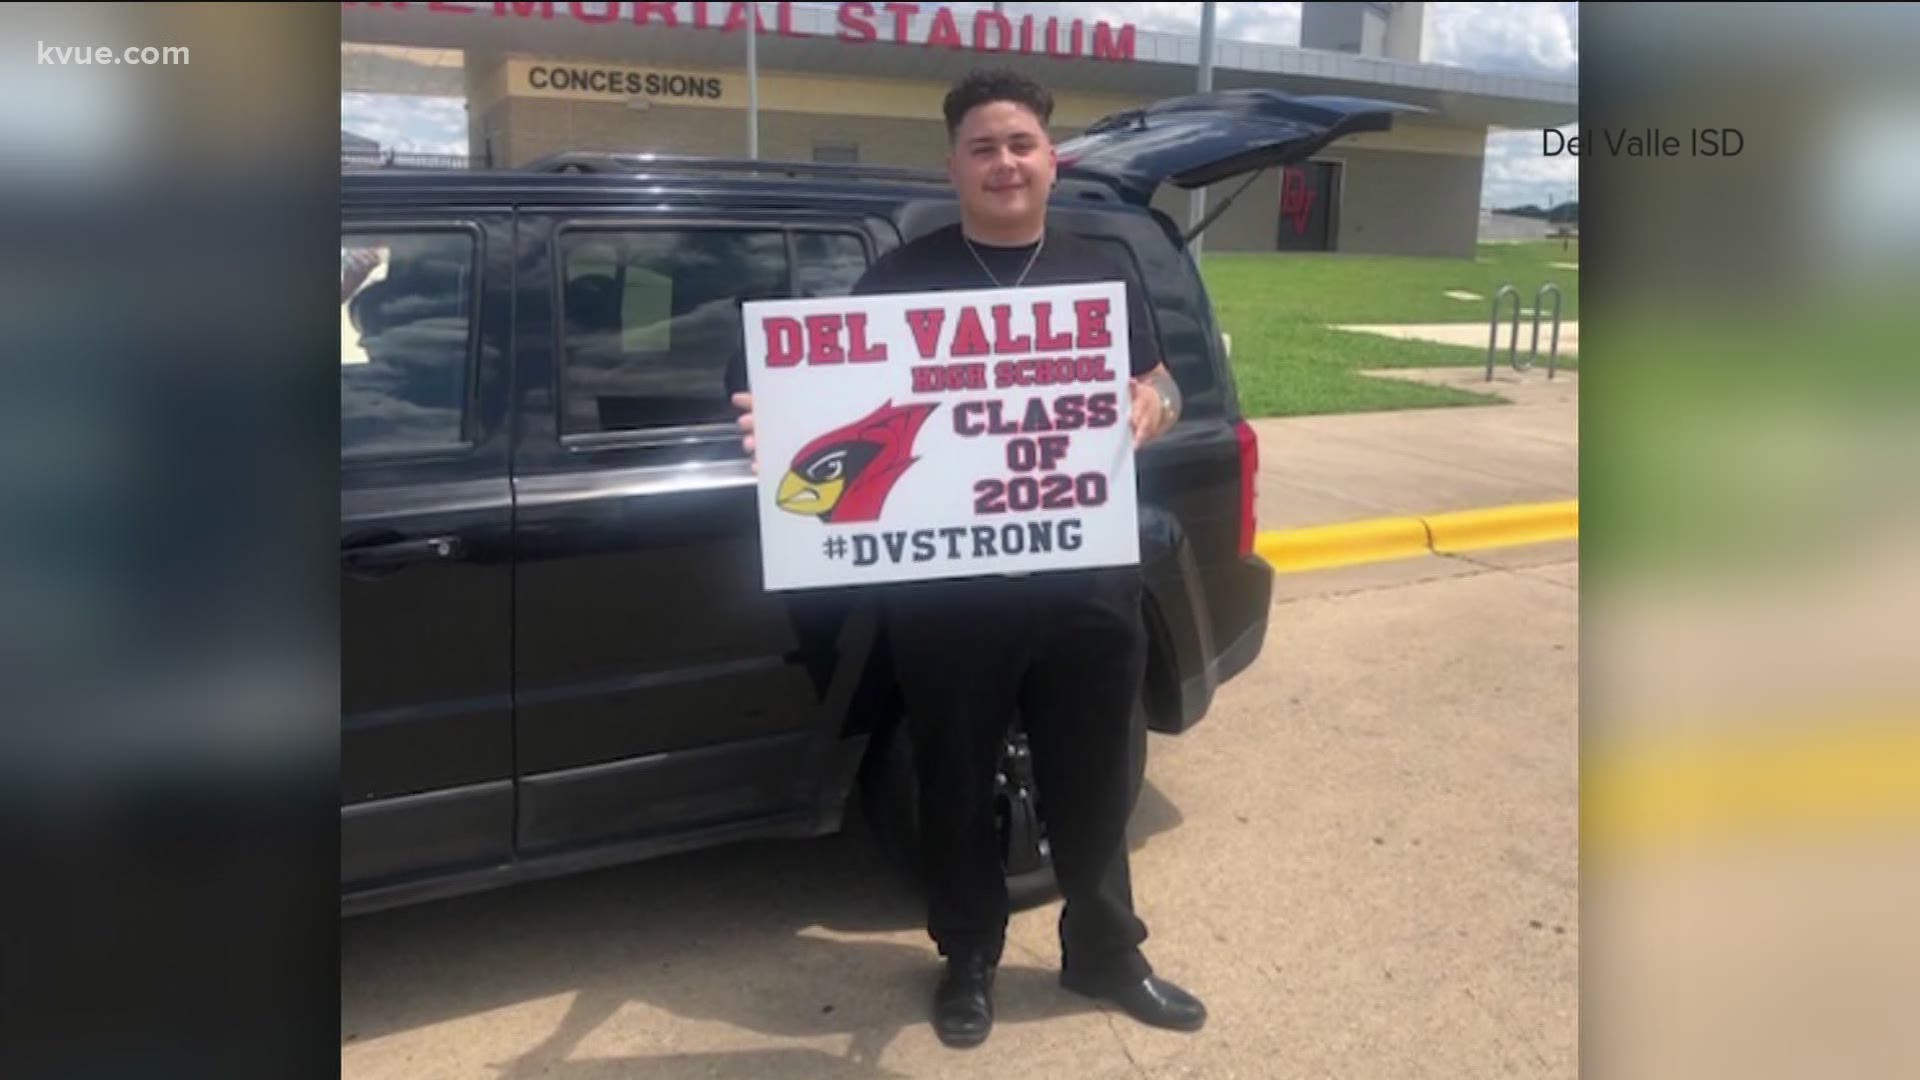 The principal of Del Valle High school said they asked about doing a parade like this and the Circuit of the Americas said yes without hesitation.